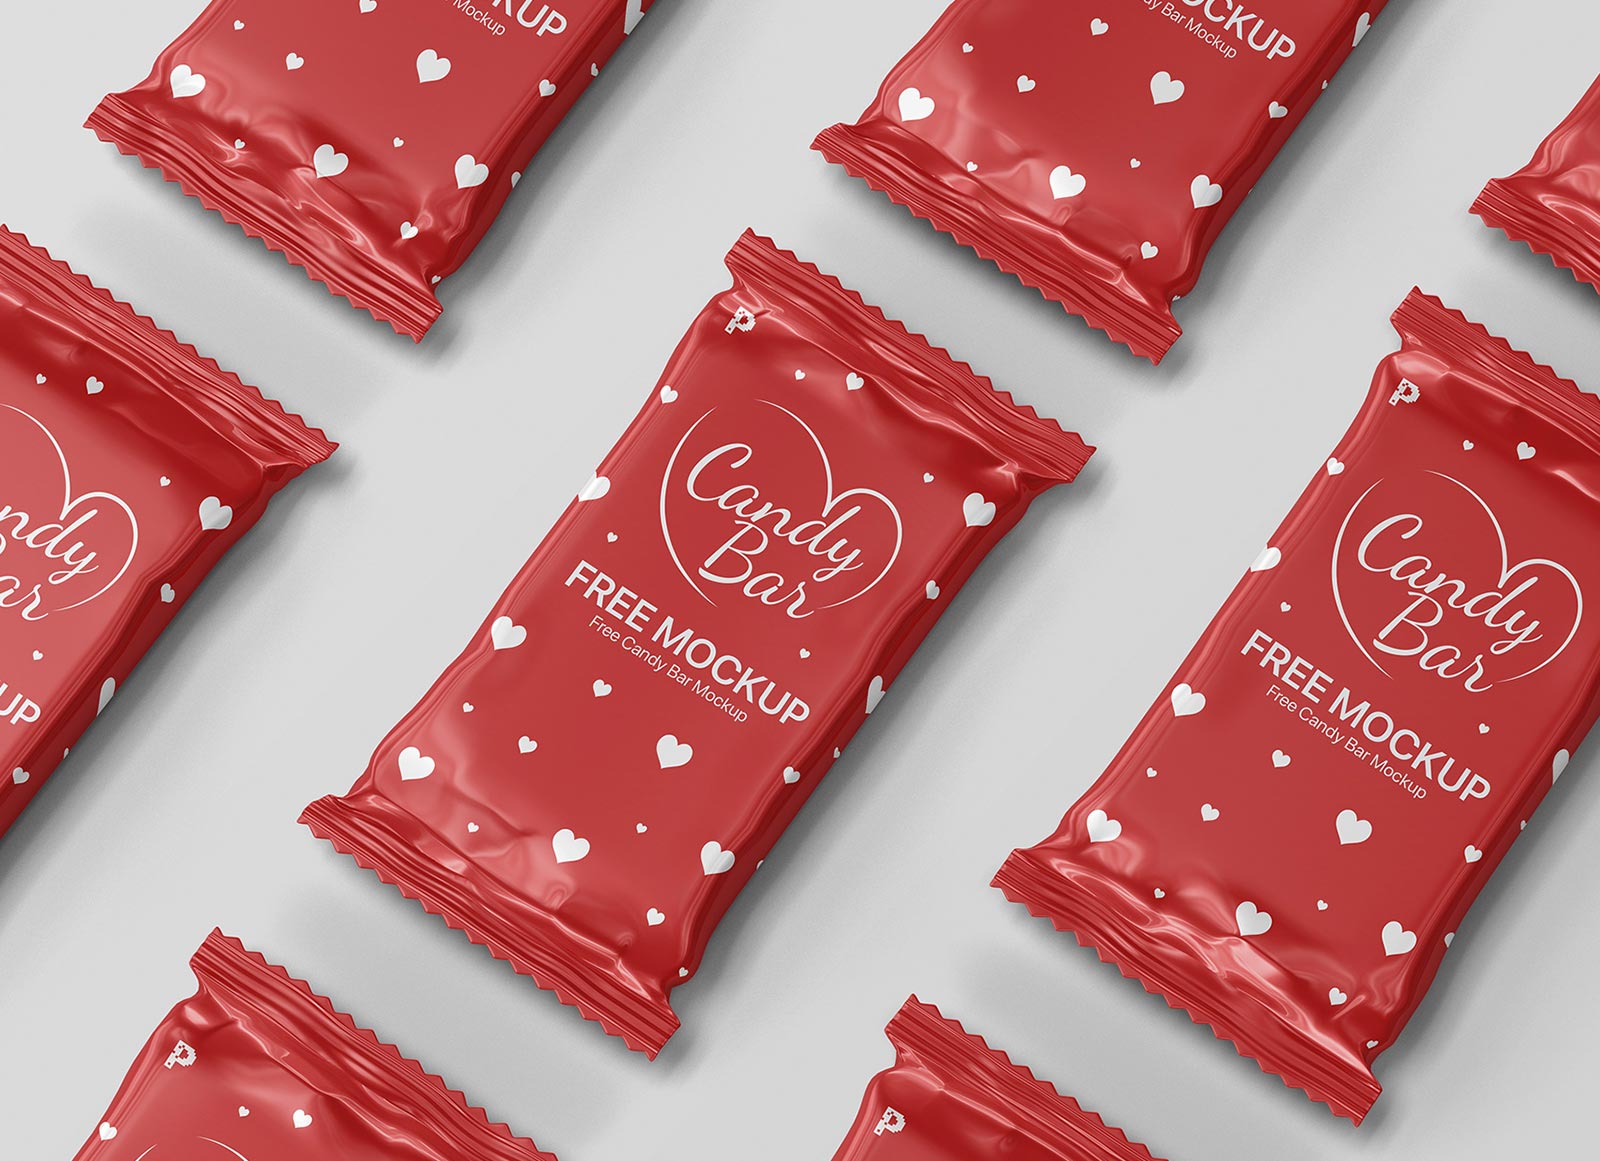 Free-Isometric-Candy-Chocolate-Bar-Packaging-Mockup-PSD